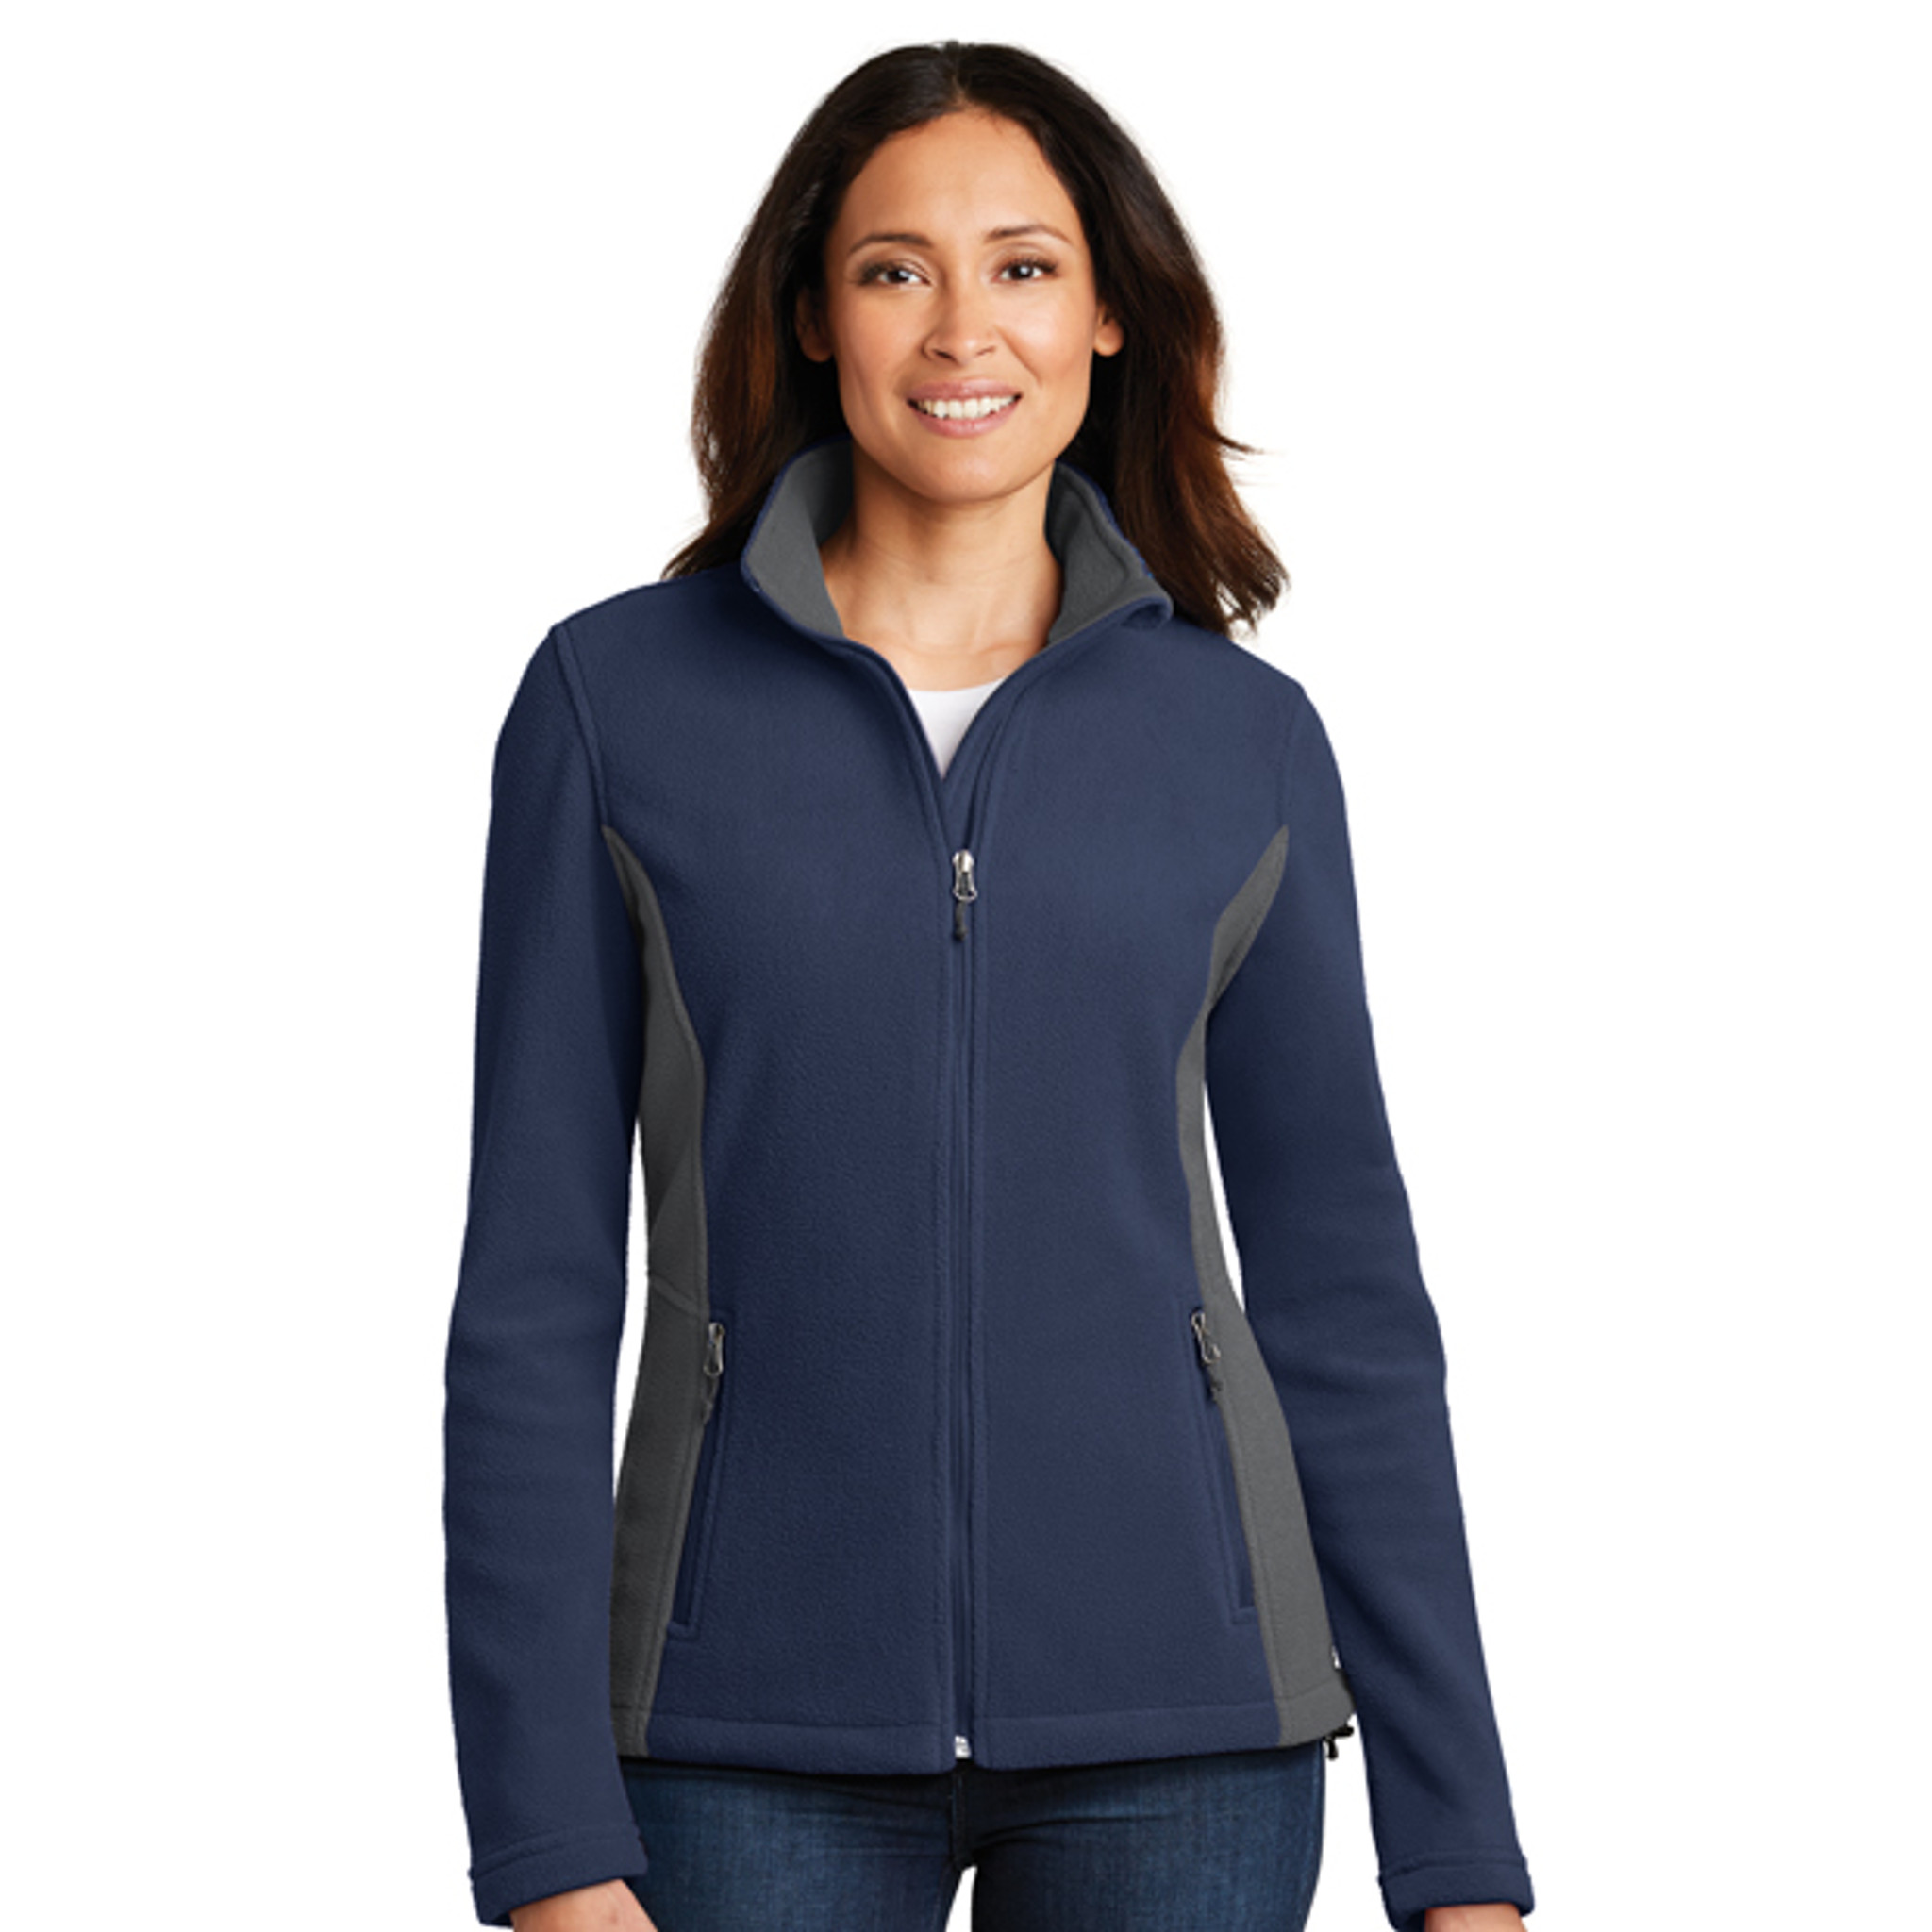 Women's Port Authority Colorblock Value Fleece Jacket - First State ...